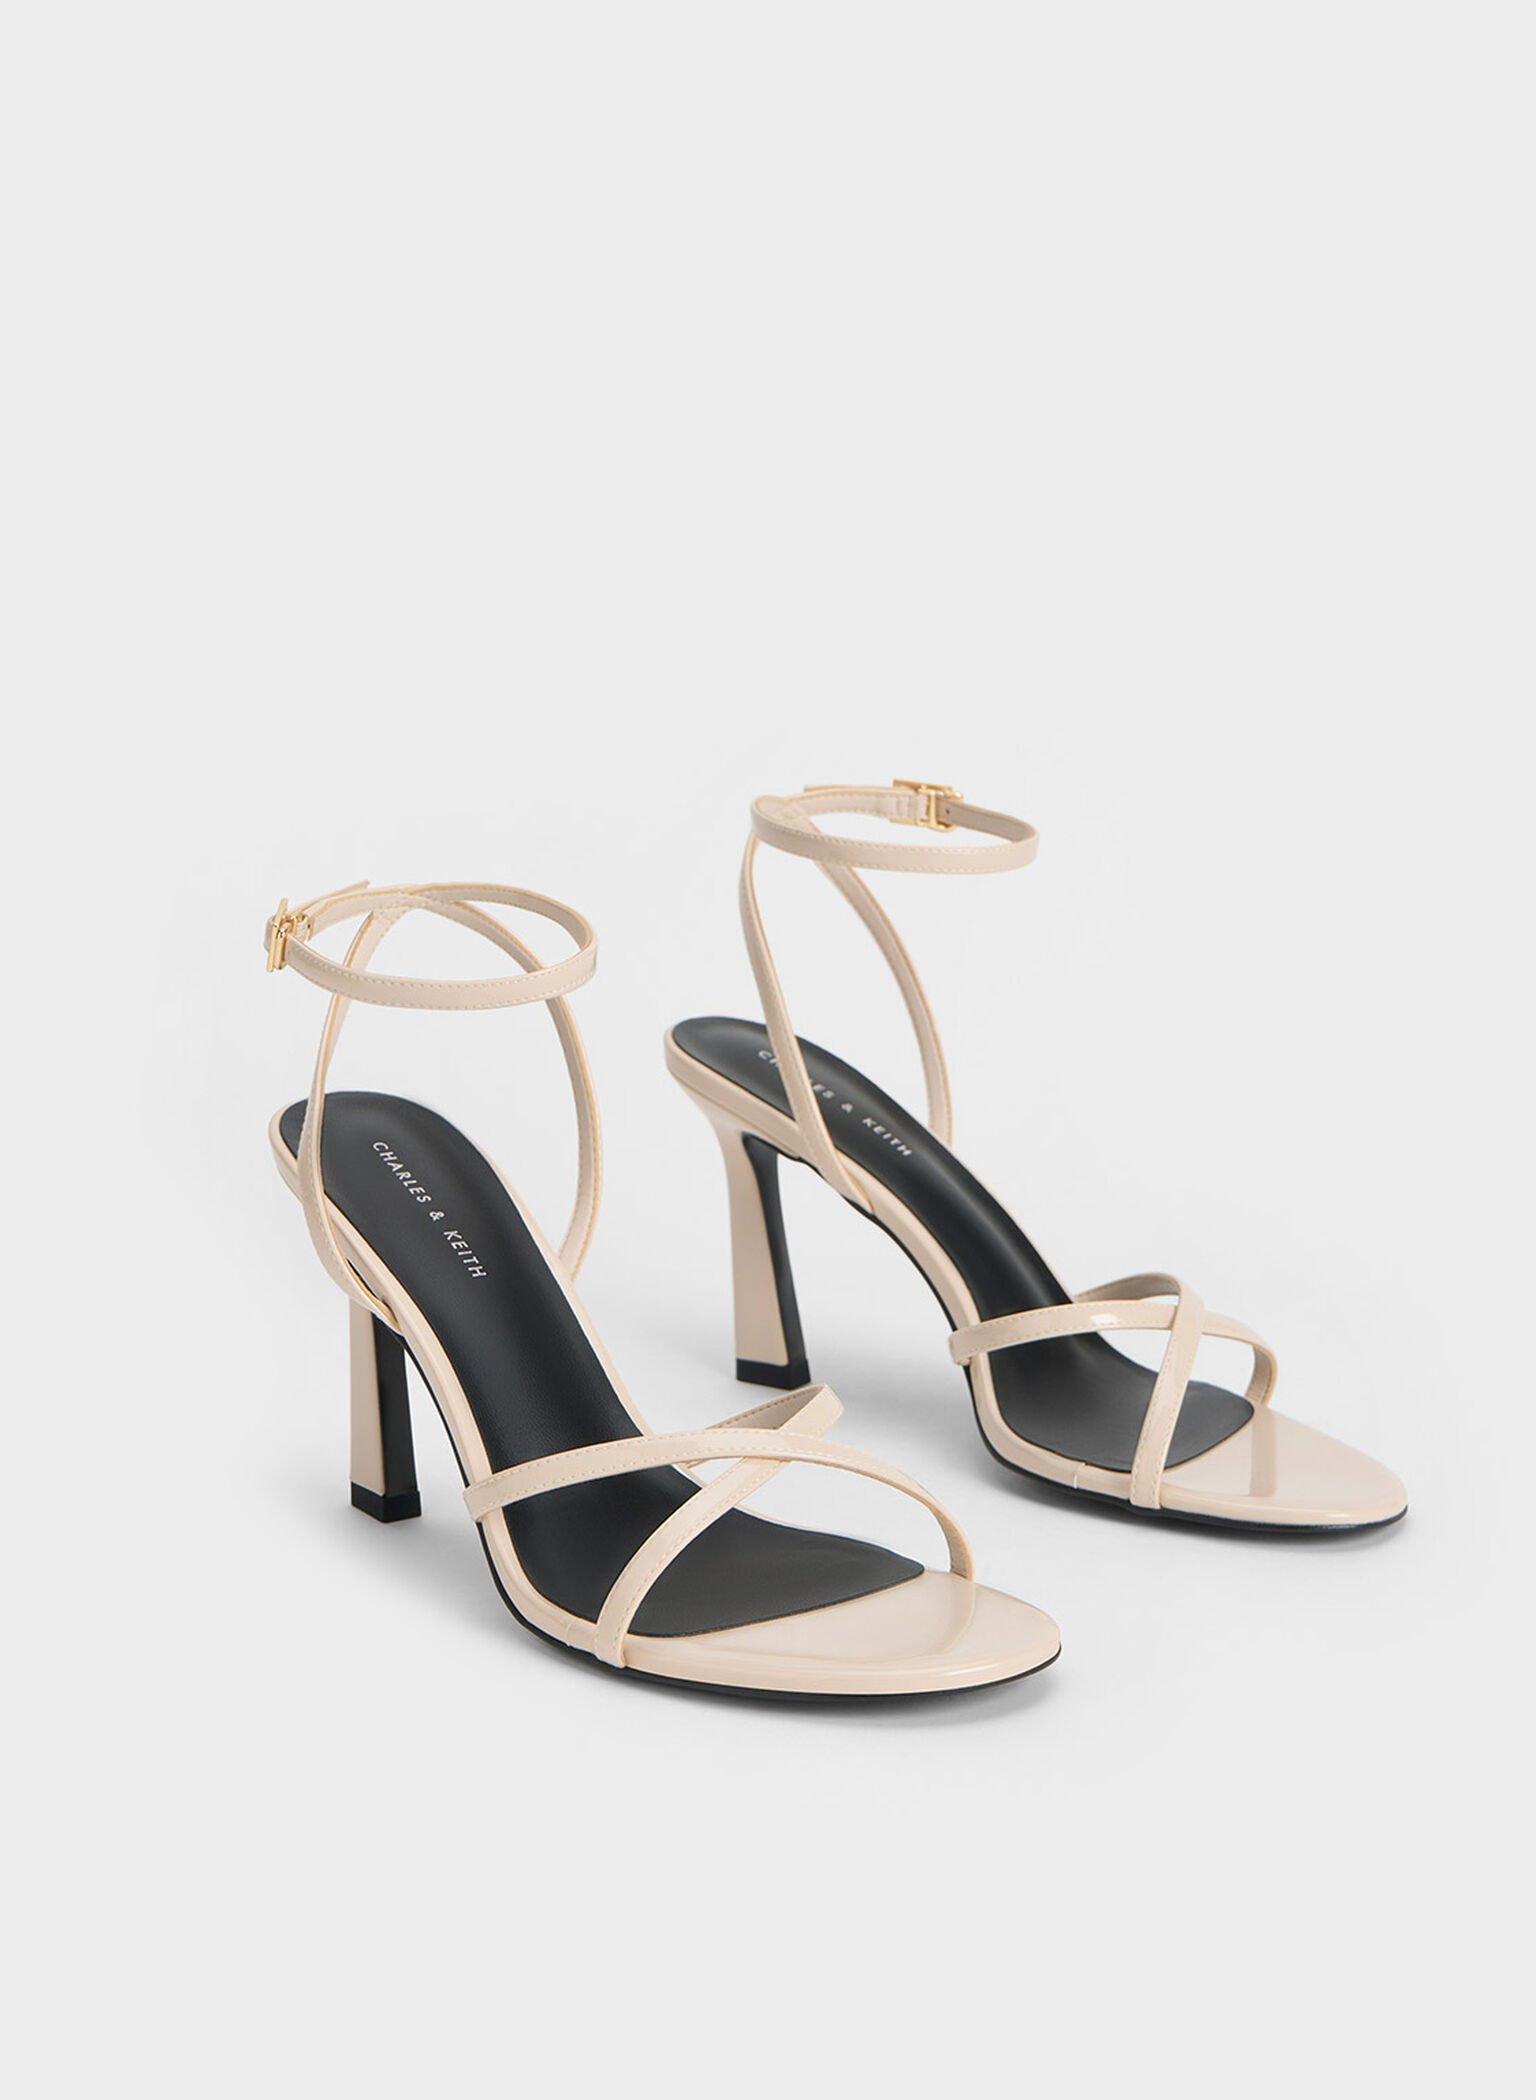 Cream Patent Crossover-Strap Heeled Sandals - CHARLES & KEITH AU